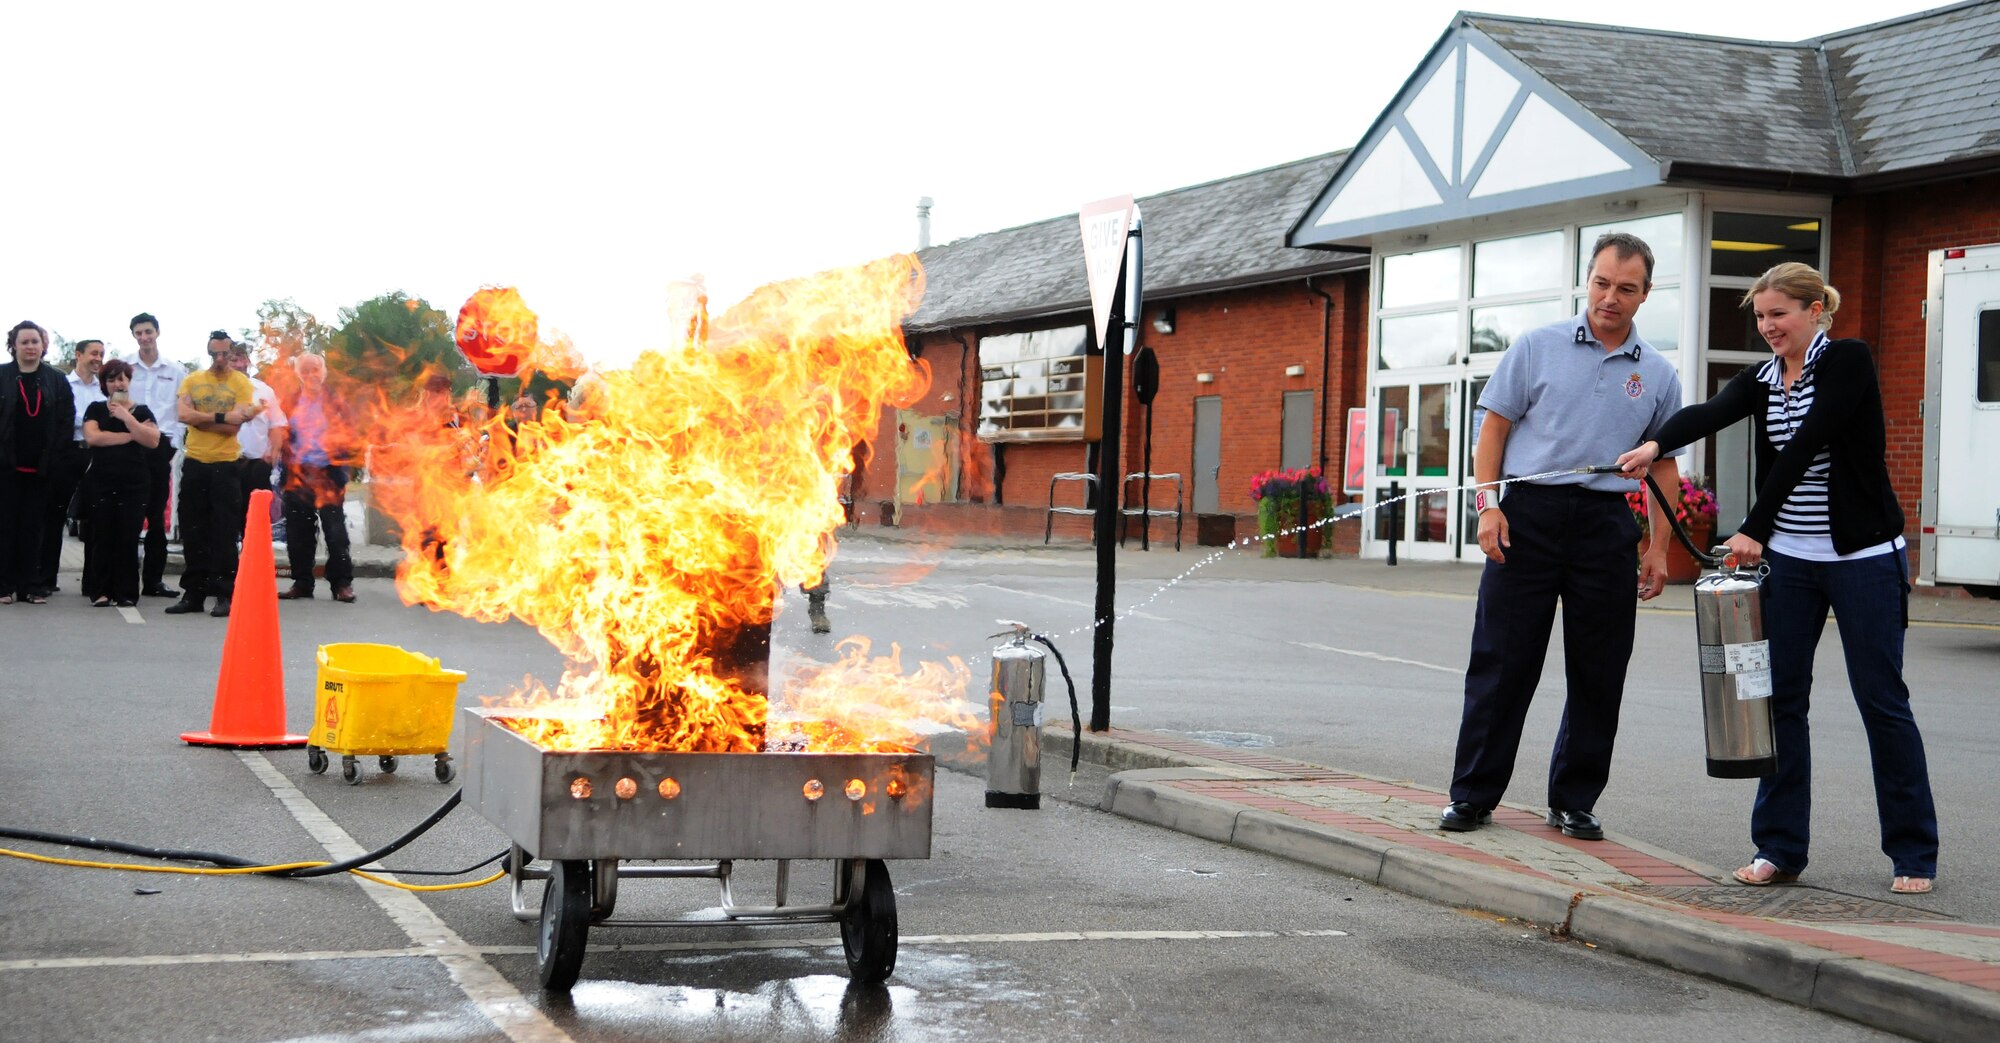 RAF MILDENHALL, England -- Ela Toombs, a Base Exchange concessionaire, practices using a fire extinguisher while being observed by her instructor, Adrian Delaney, RAF Mildenhall Fire Department watch manager, outside the BX July 15. The fire department taught concessionaires from RAFs Mildenhall and Lakenheath to use the PASS method to put out small fires when it is safe to do so. This technique involves pulling the extinguisher pin, aiming at the base of the fire, squeezing the extinguisher handle and sweeping from side to side until the fire is out. (U.S. Air Force photo/Staff Sgt. Thomas Trower)